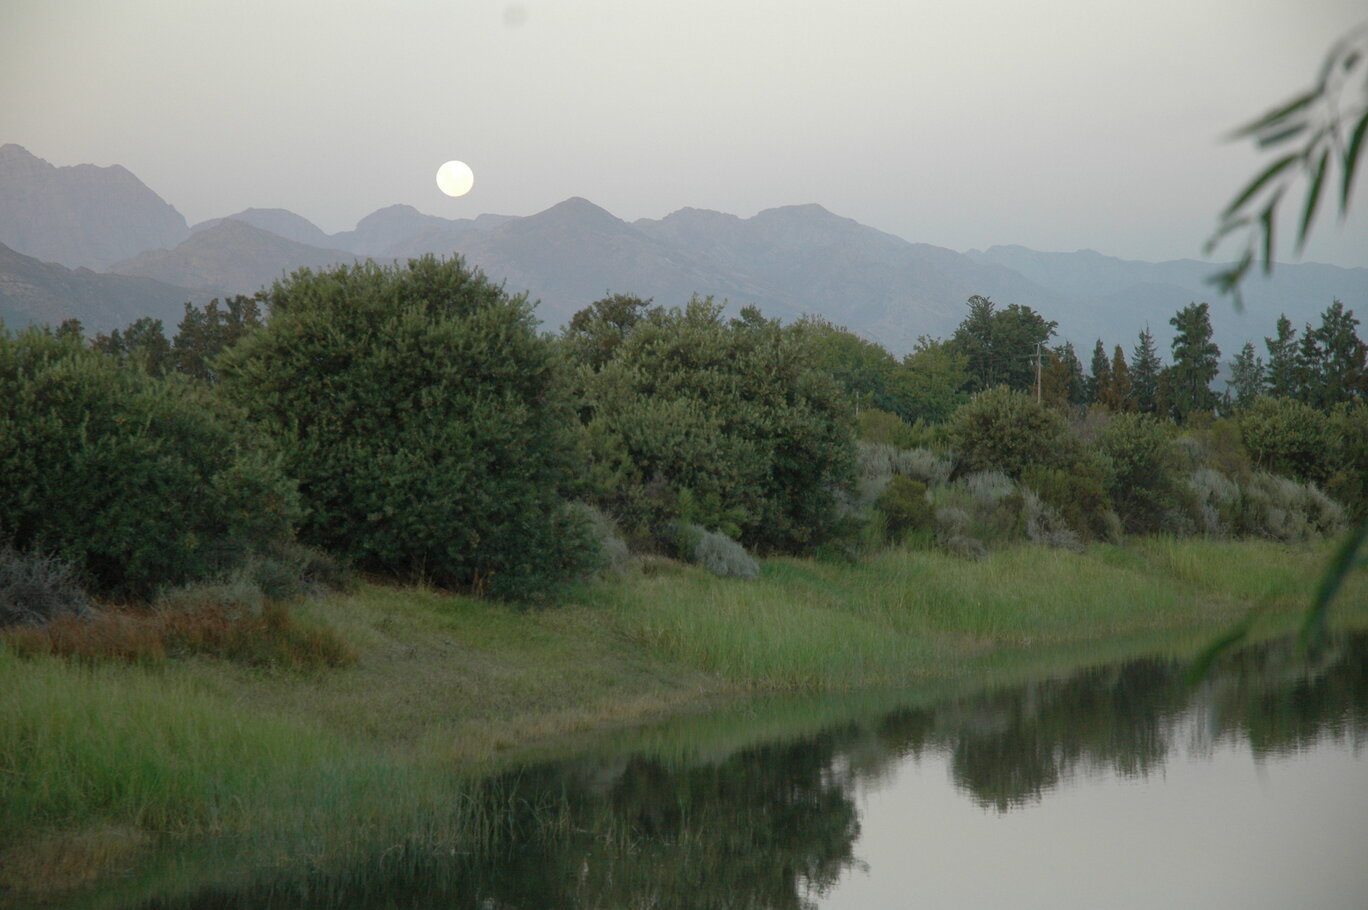 The moon rising over the Drakenstein mountains at dusk.